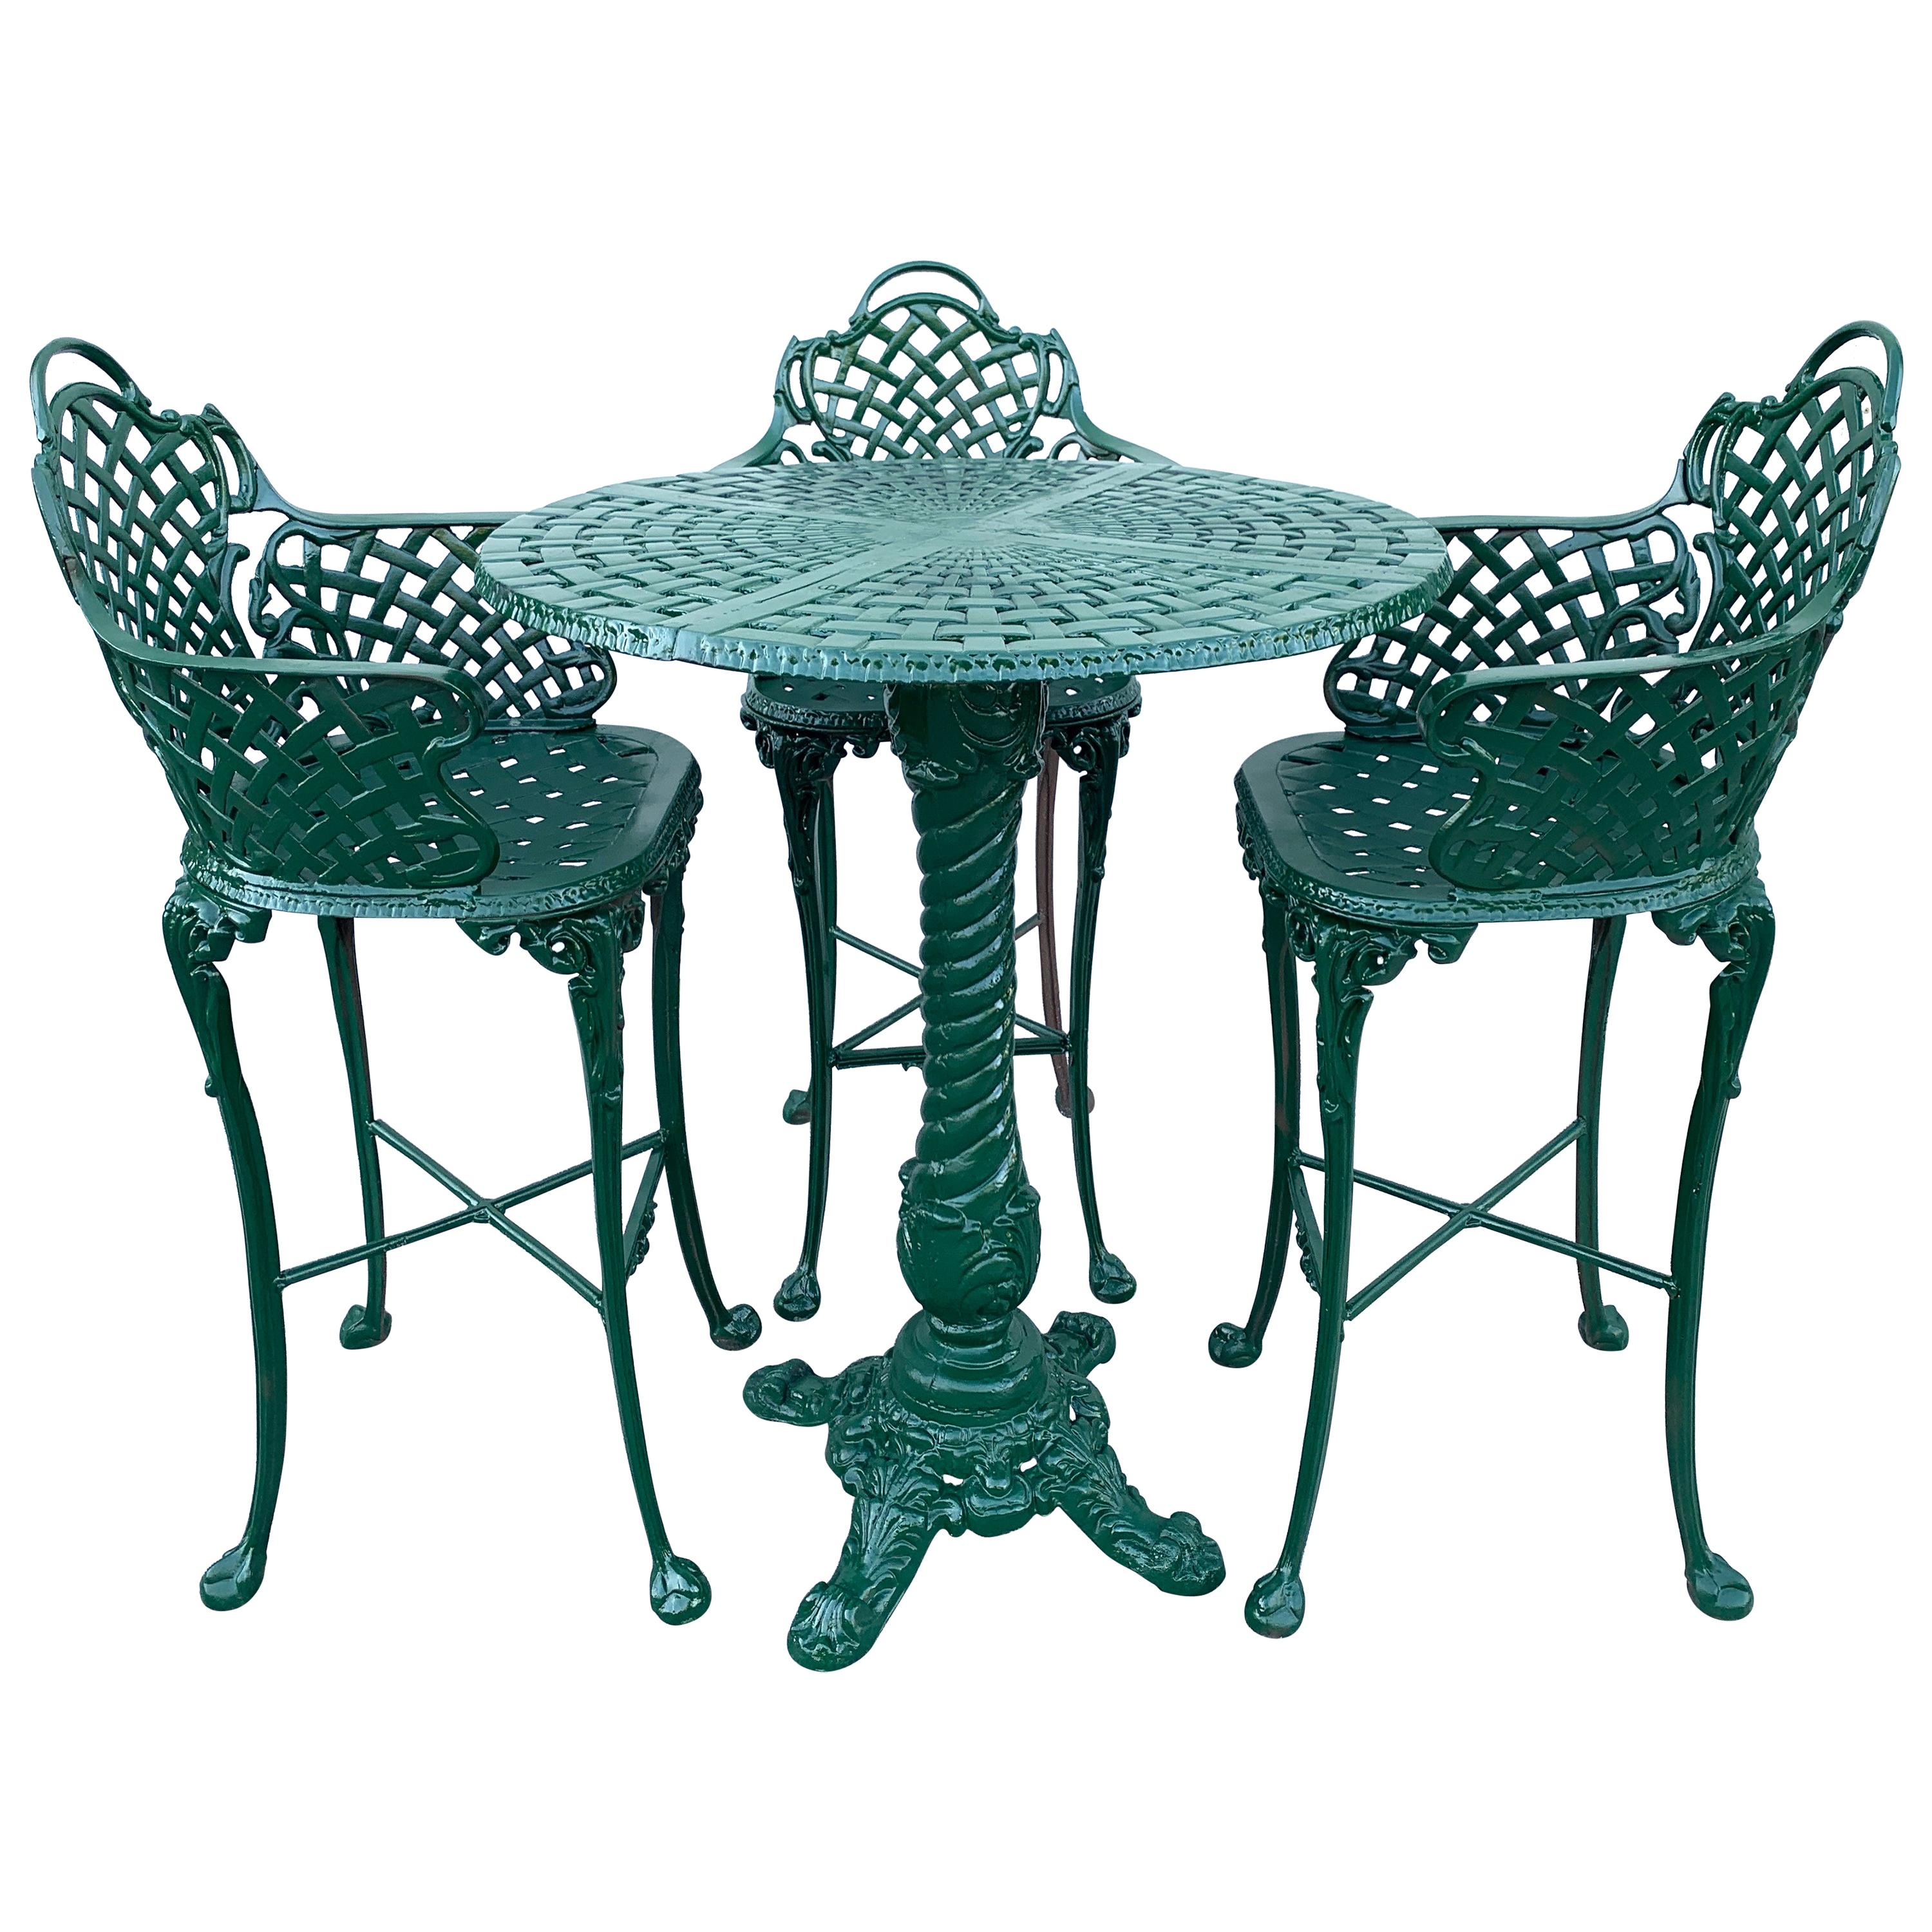 Victorian Style Garden/Patio Hightop Table and 3 Chairs, Provenance Celine Dion